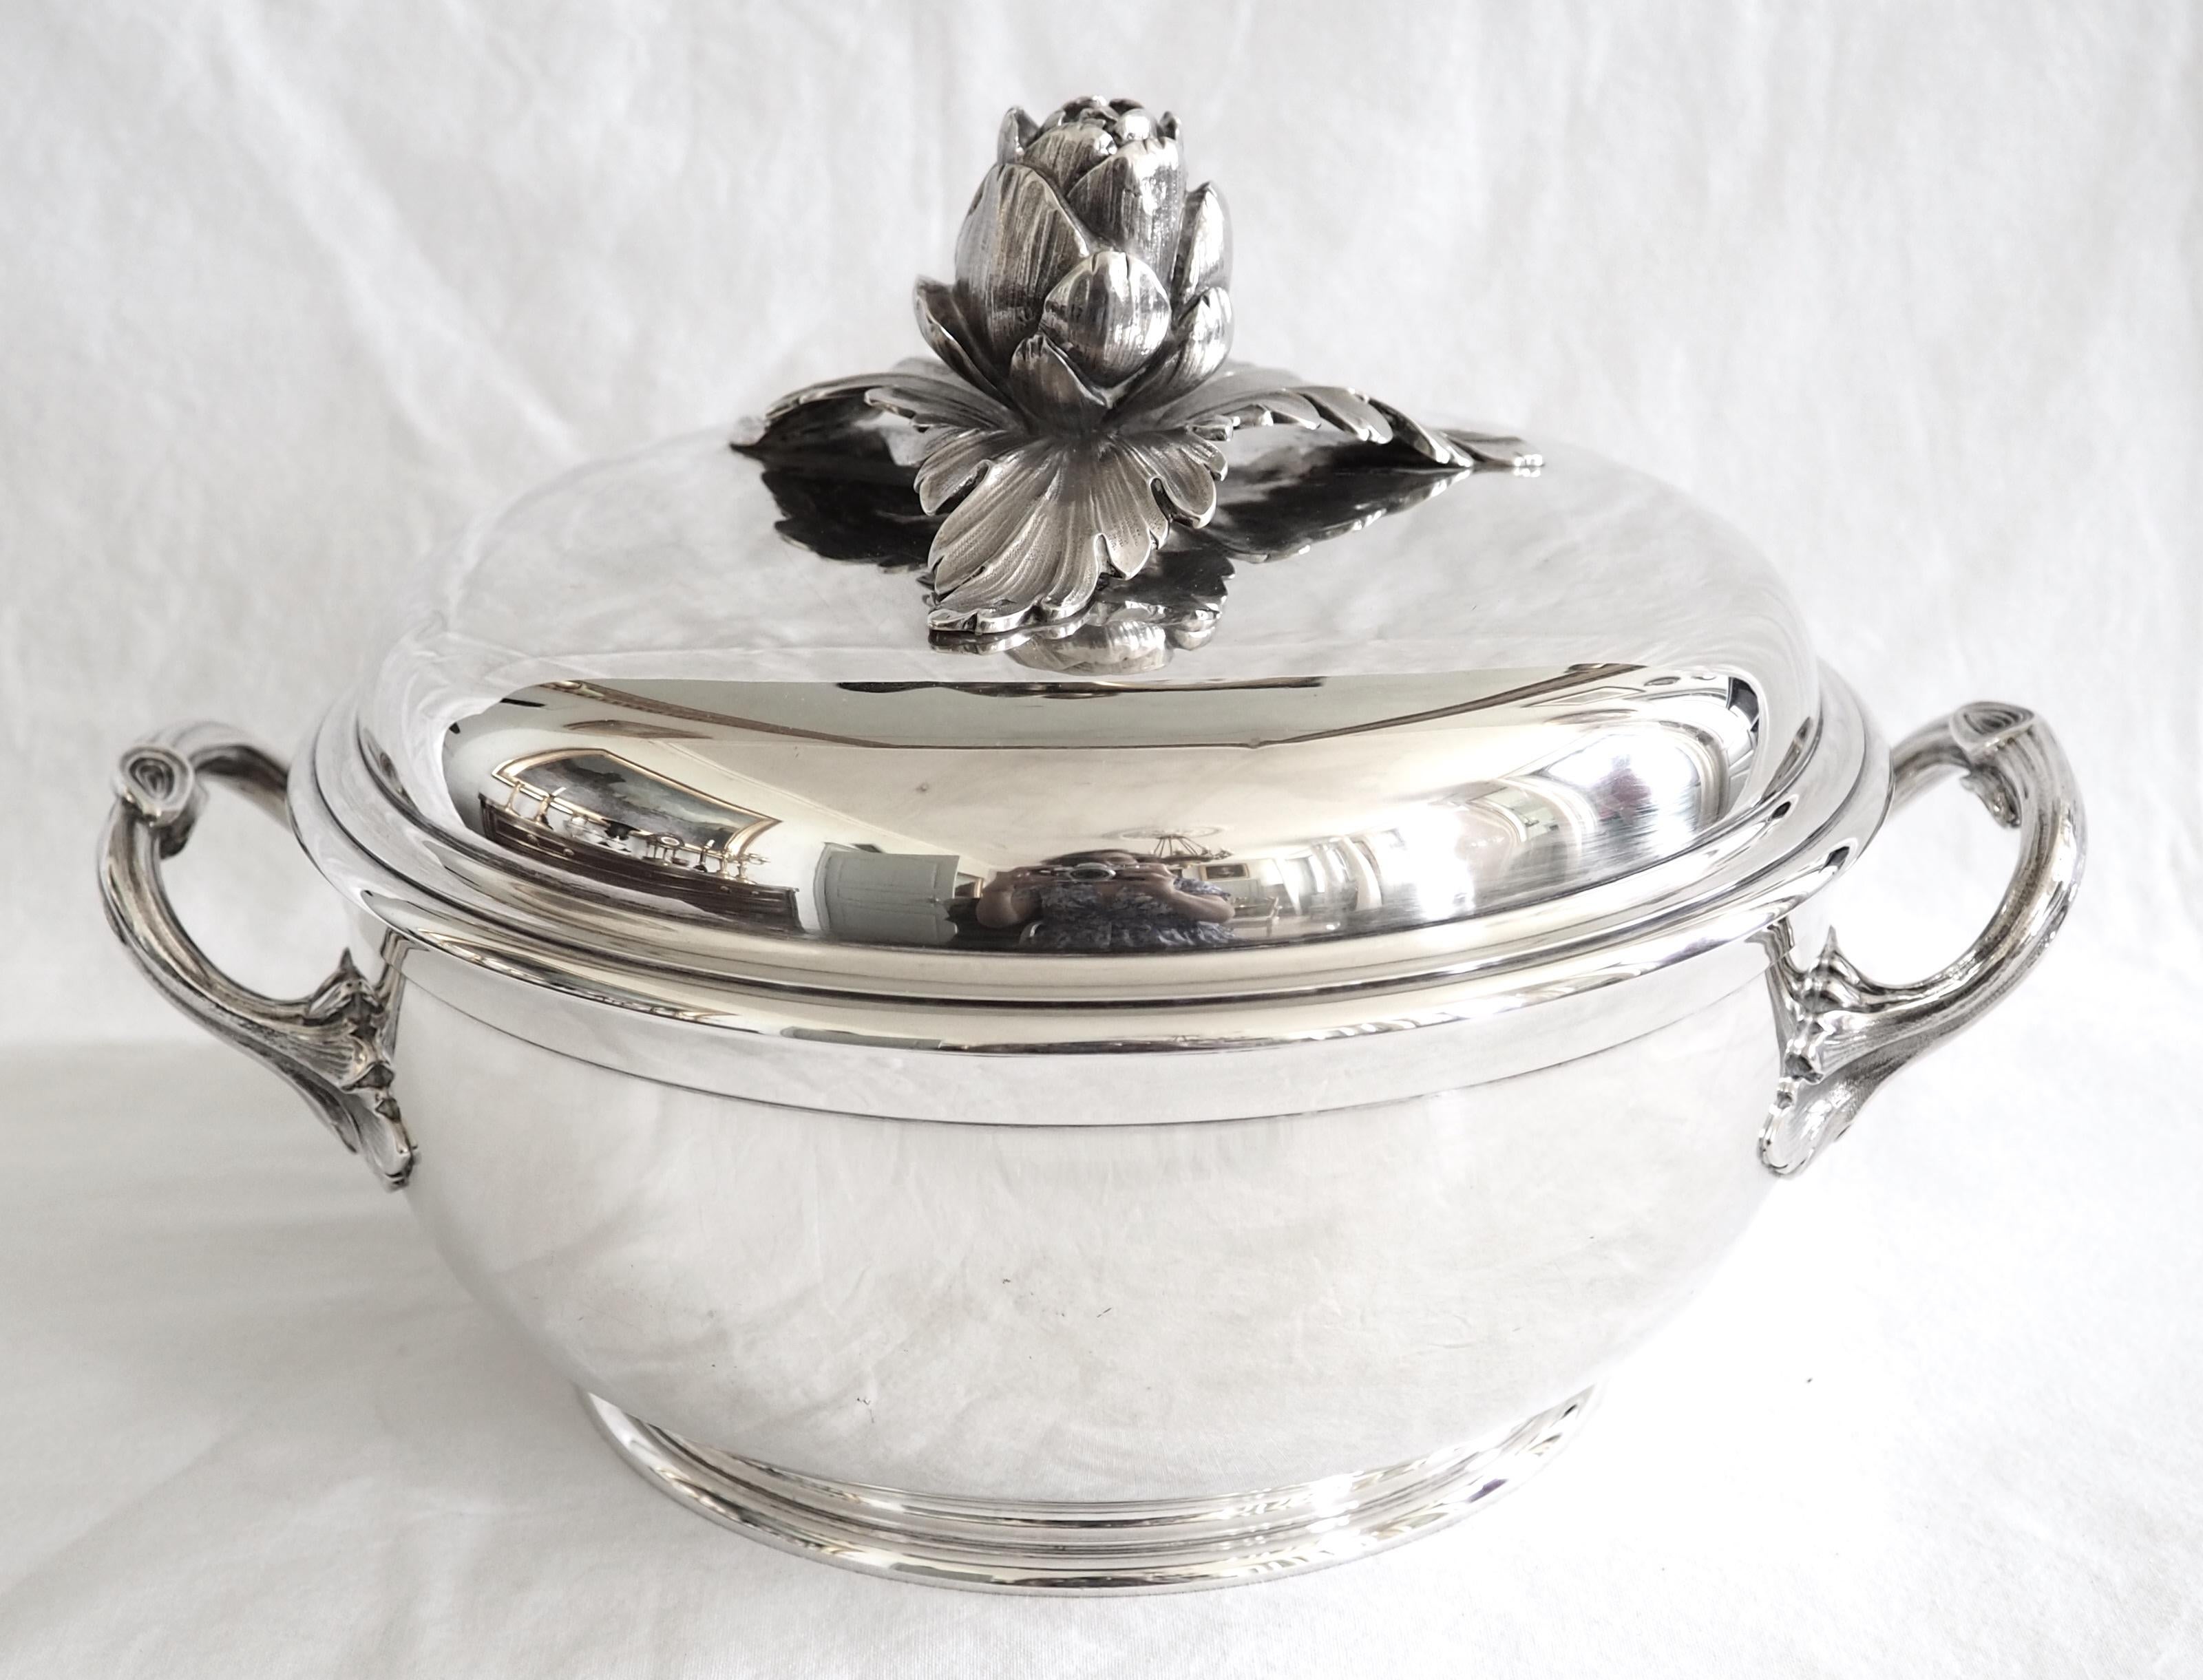 Large Louis XV style sterling silver vegetable dish, 20th century French production.

Beautiful model by Puiforcat, appreciated as the greatest French silversmith today ; their production shows pure shapes, beautiful proportions, high-quality